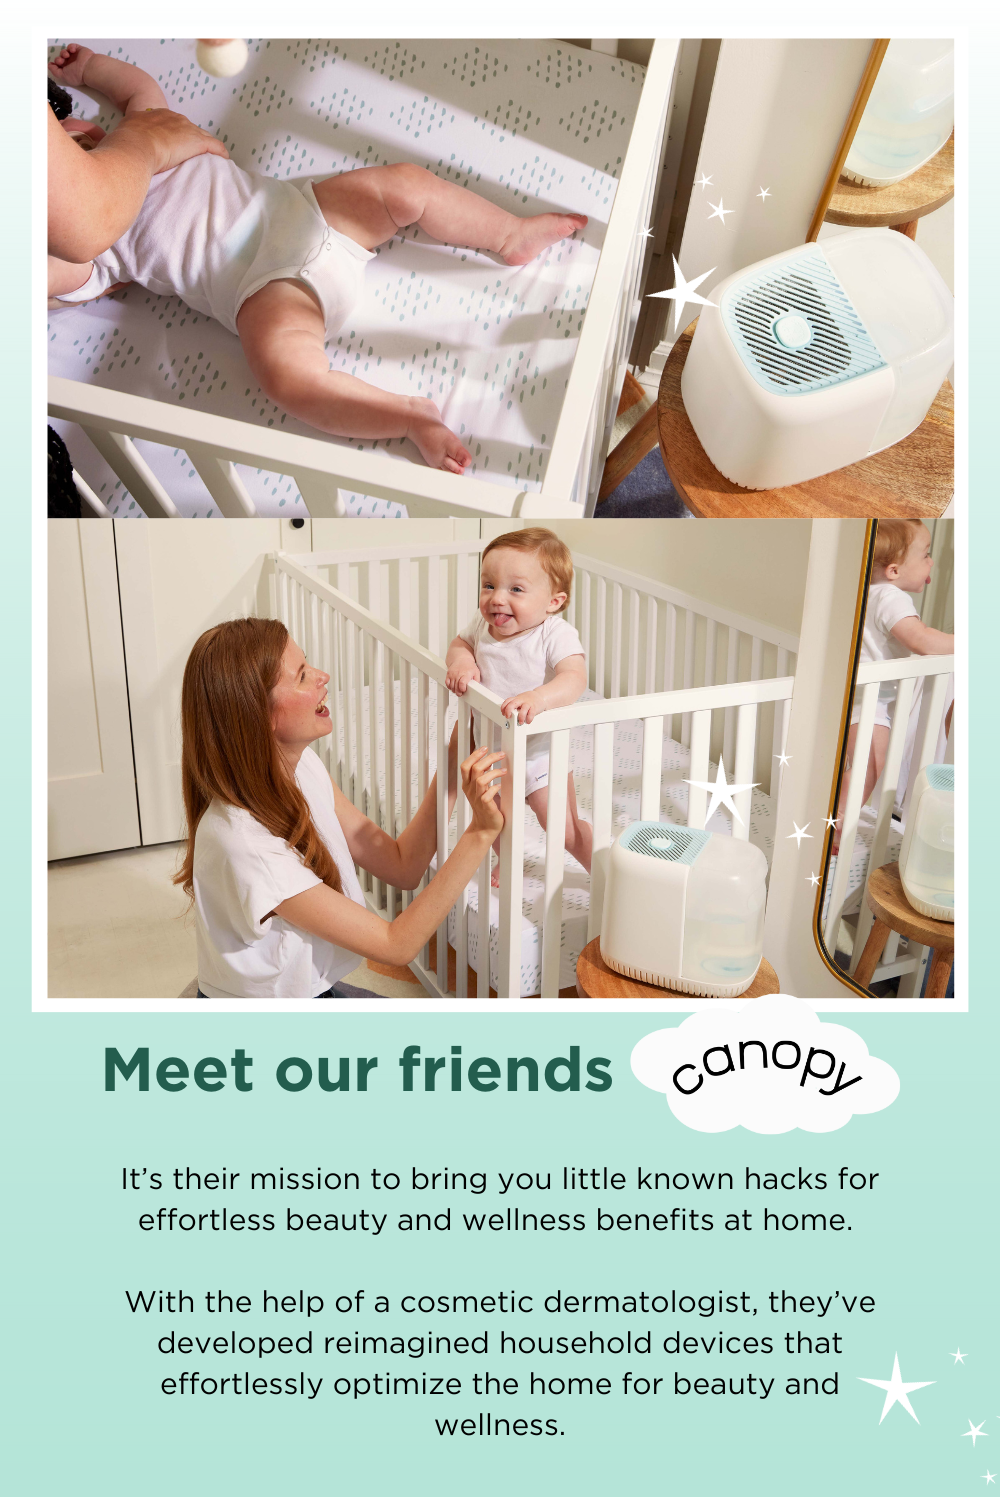 Meet our friends Canopy! It’s their mission to bring you little known hacks for effortless beauty and wellness benefits at home.\xa0 With the help of a cosmetic dermatologist, they’ve developed reimagined household devices that effortlessly optimize the home for beauty and wellness.